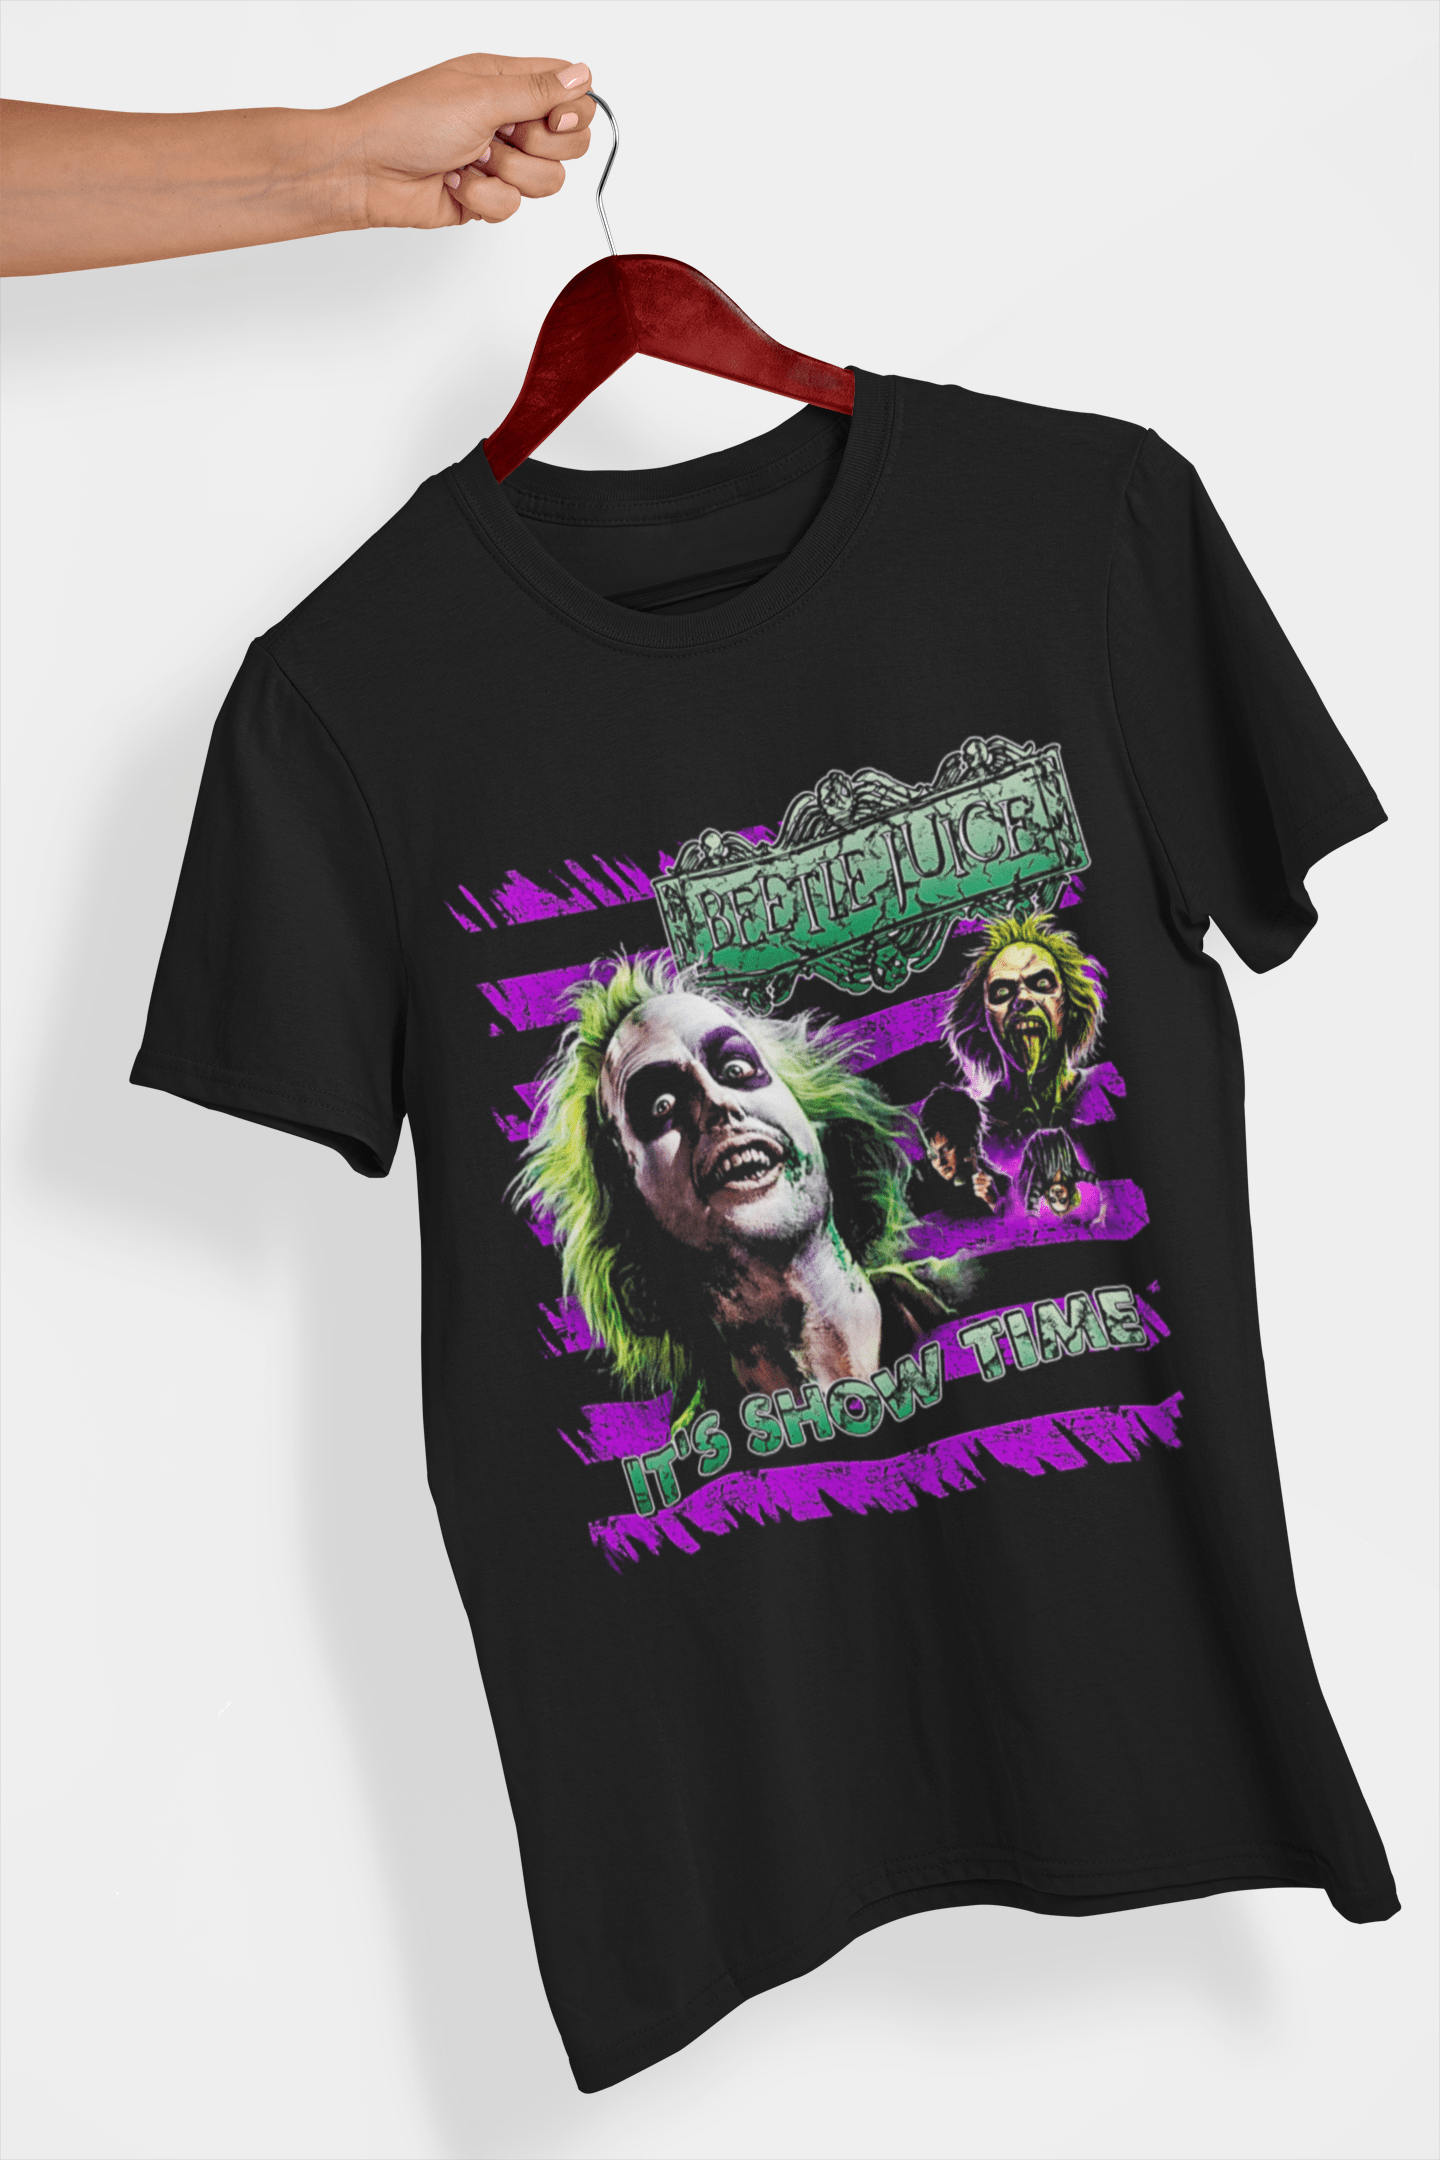 Beetlejuice, It's show time - T-Shirt